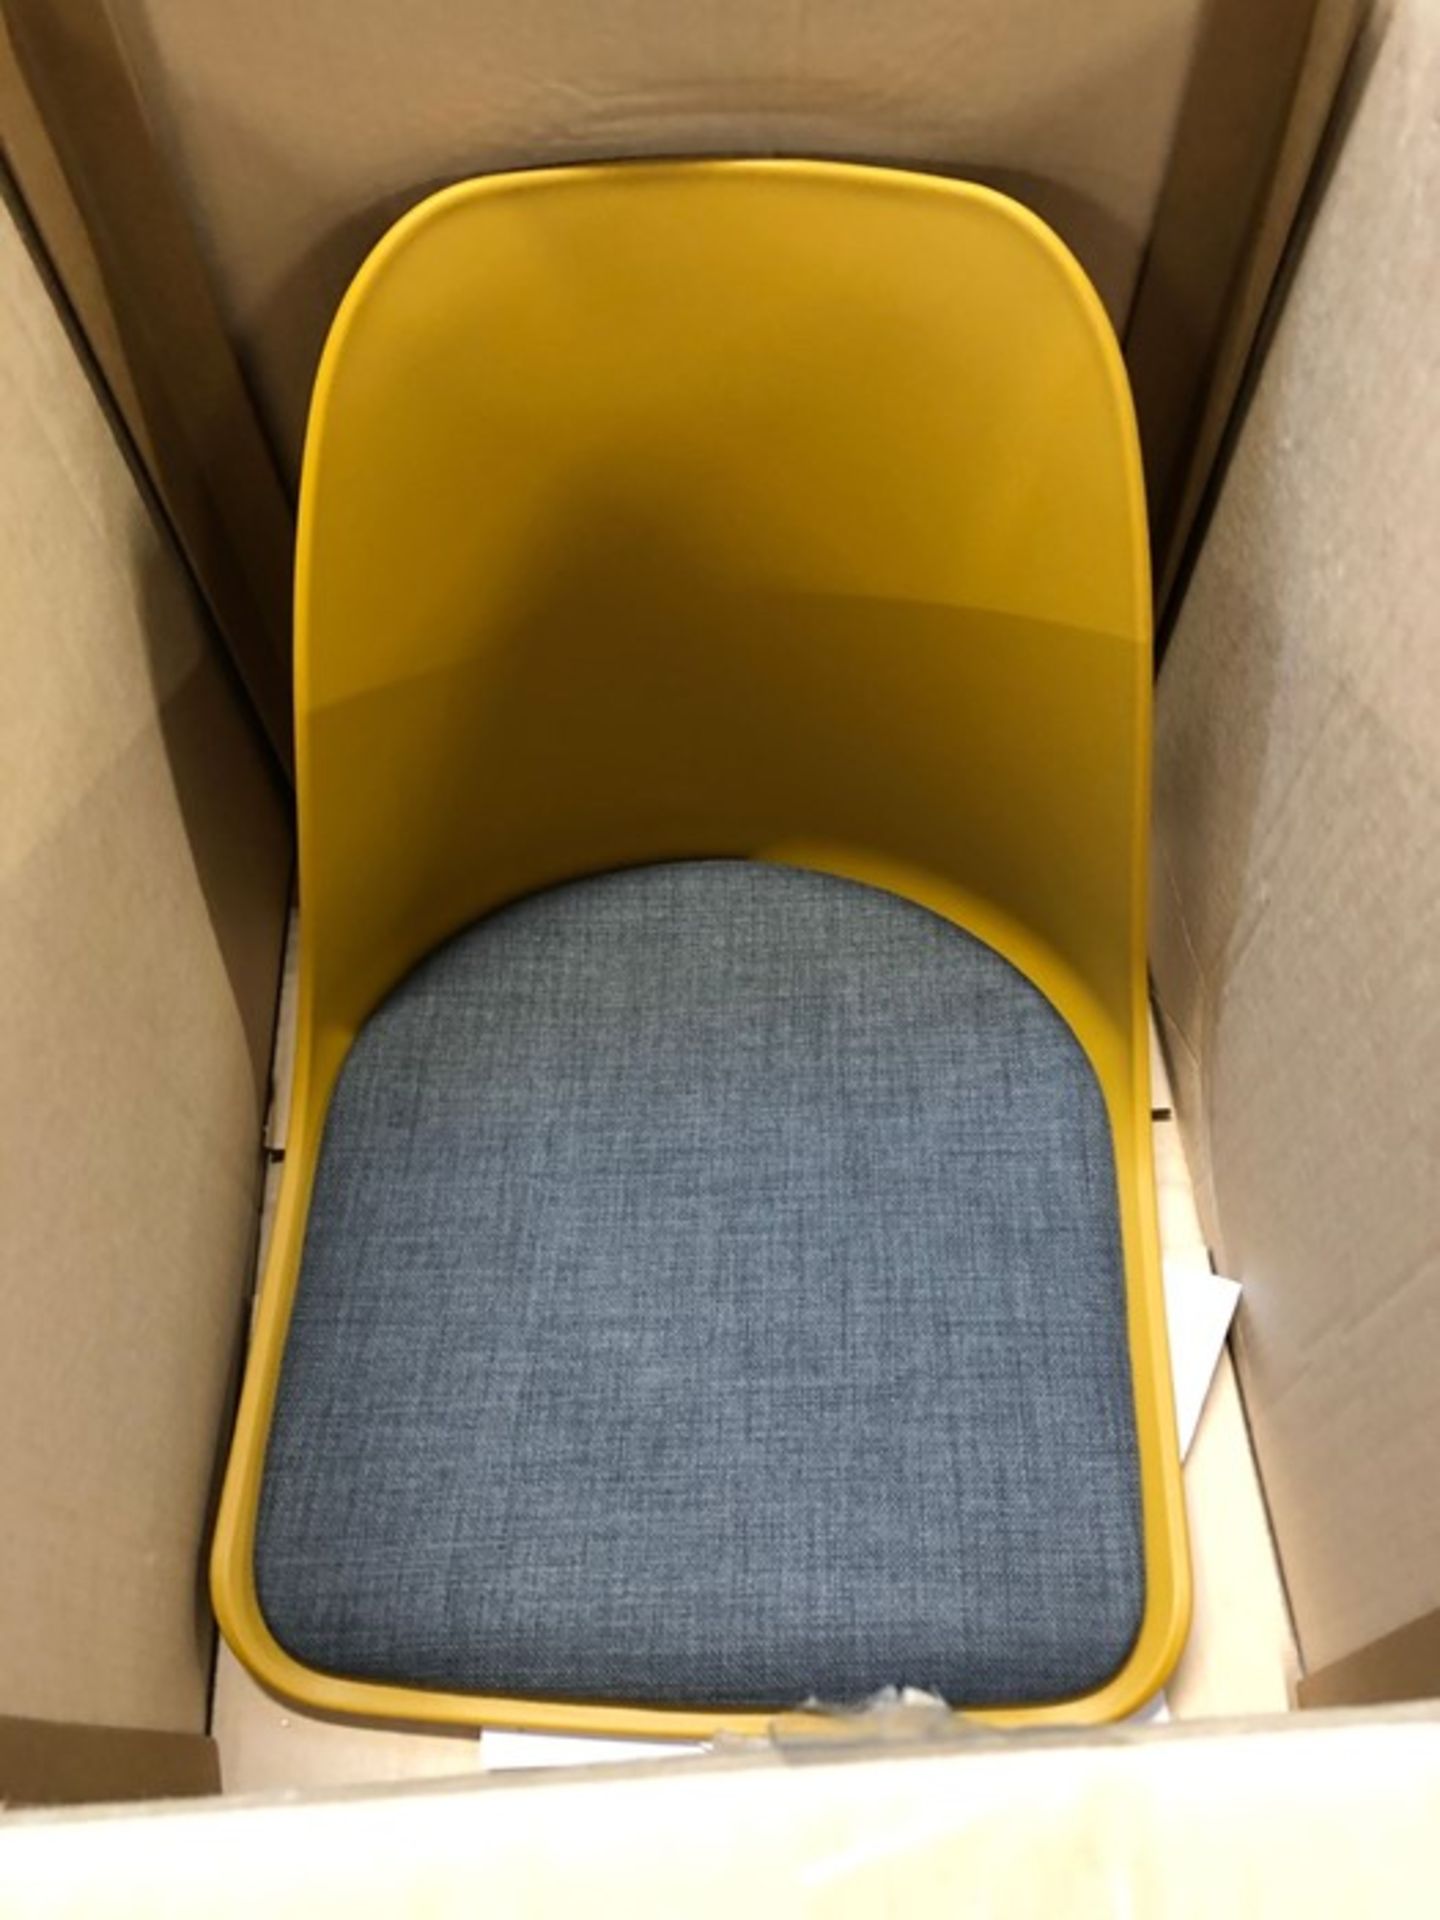 HOUSE BY JOHN LEWIS WHISTLER CHAIR IN MUSTARD - Image 2 of 3